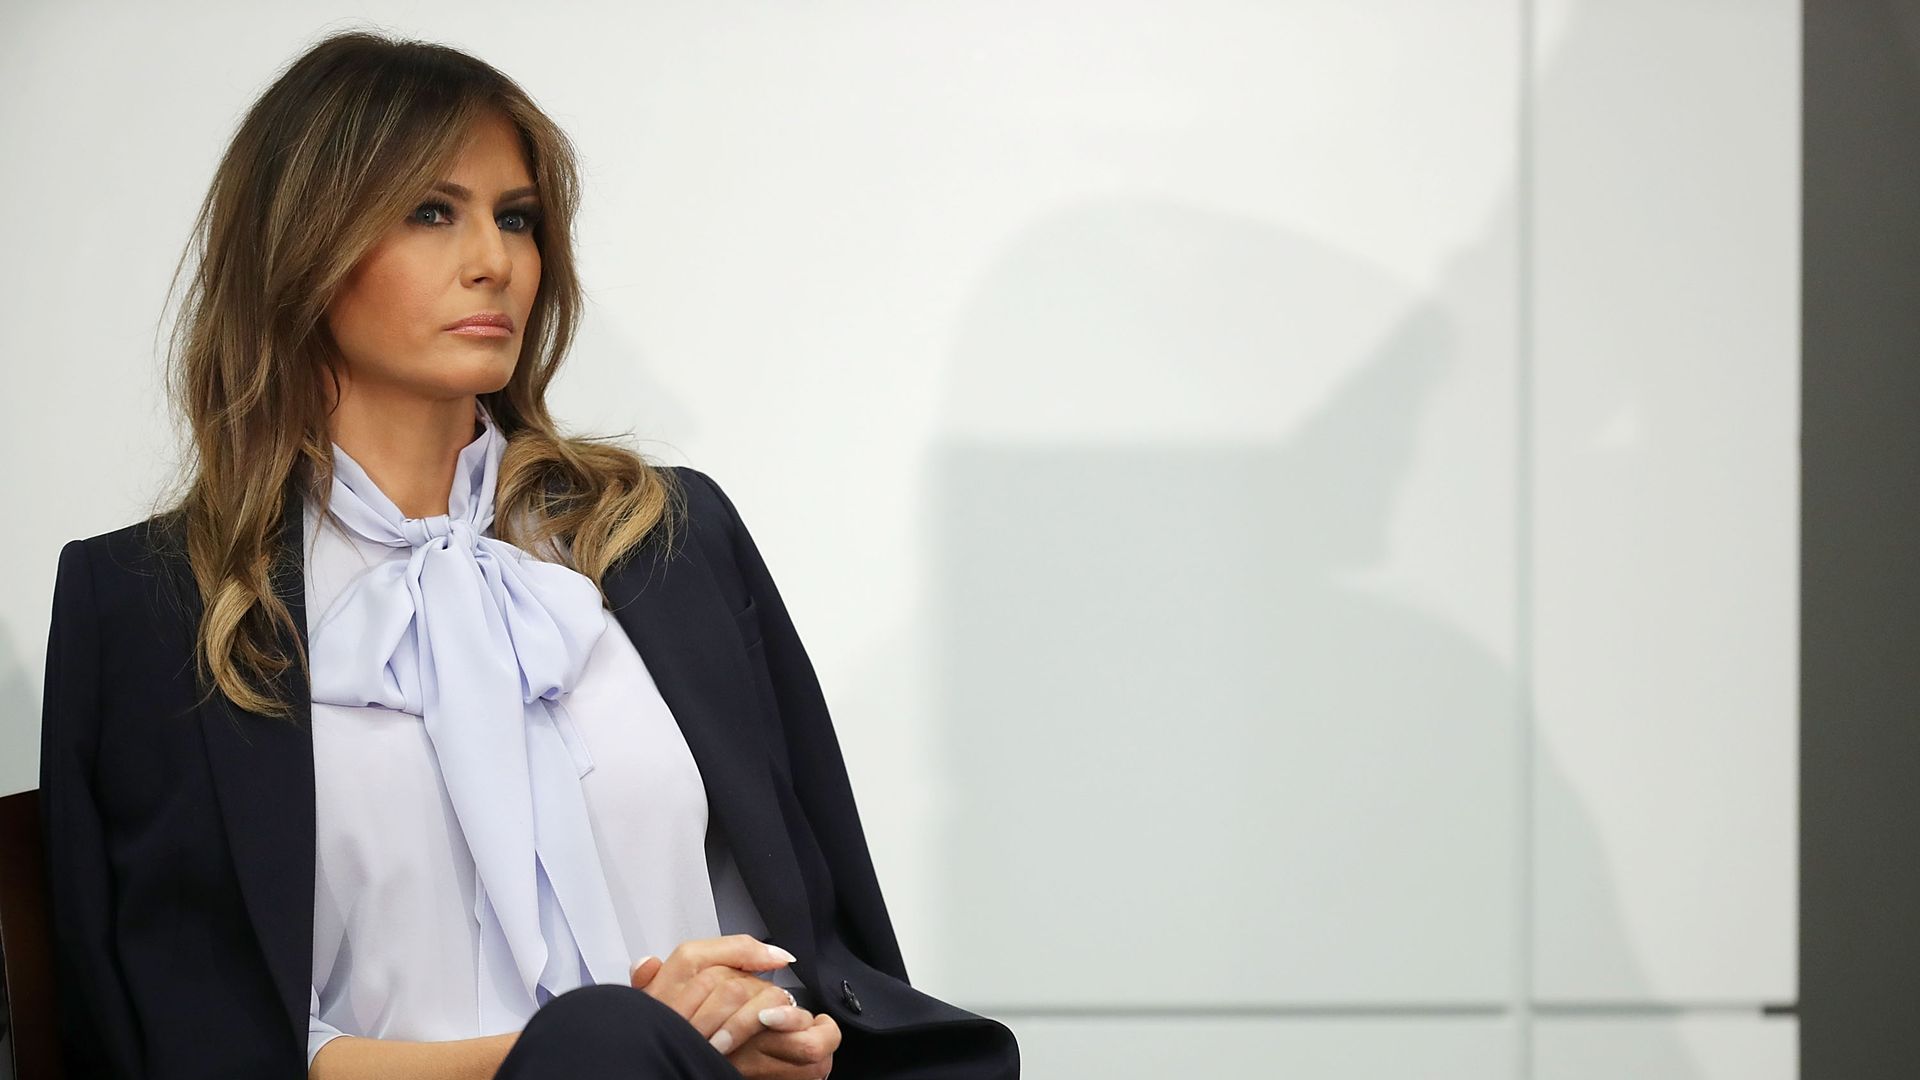 Melania Trump sitting in a chair on stage with a serious expression